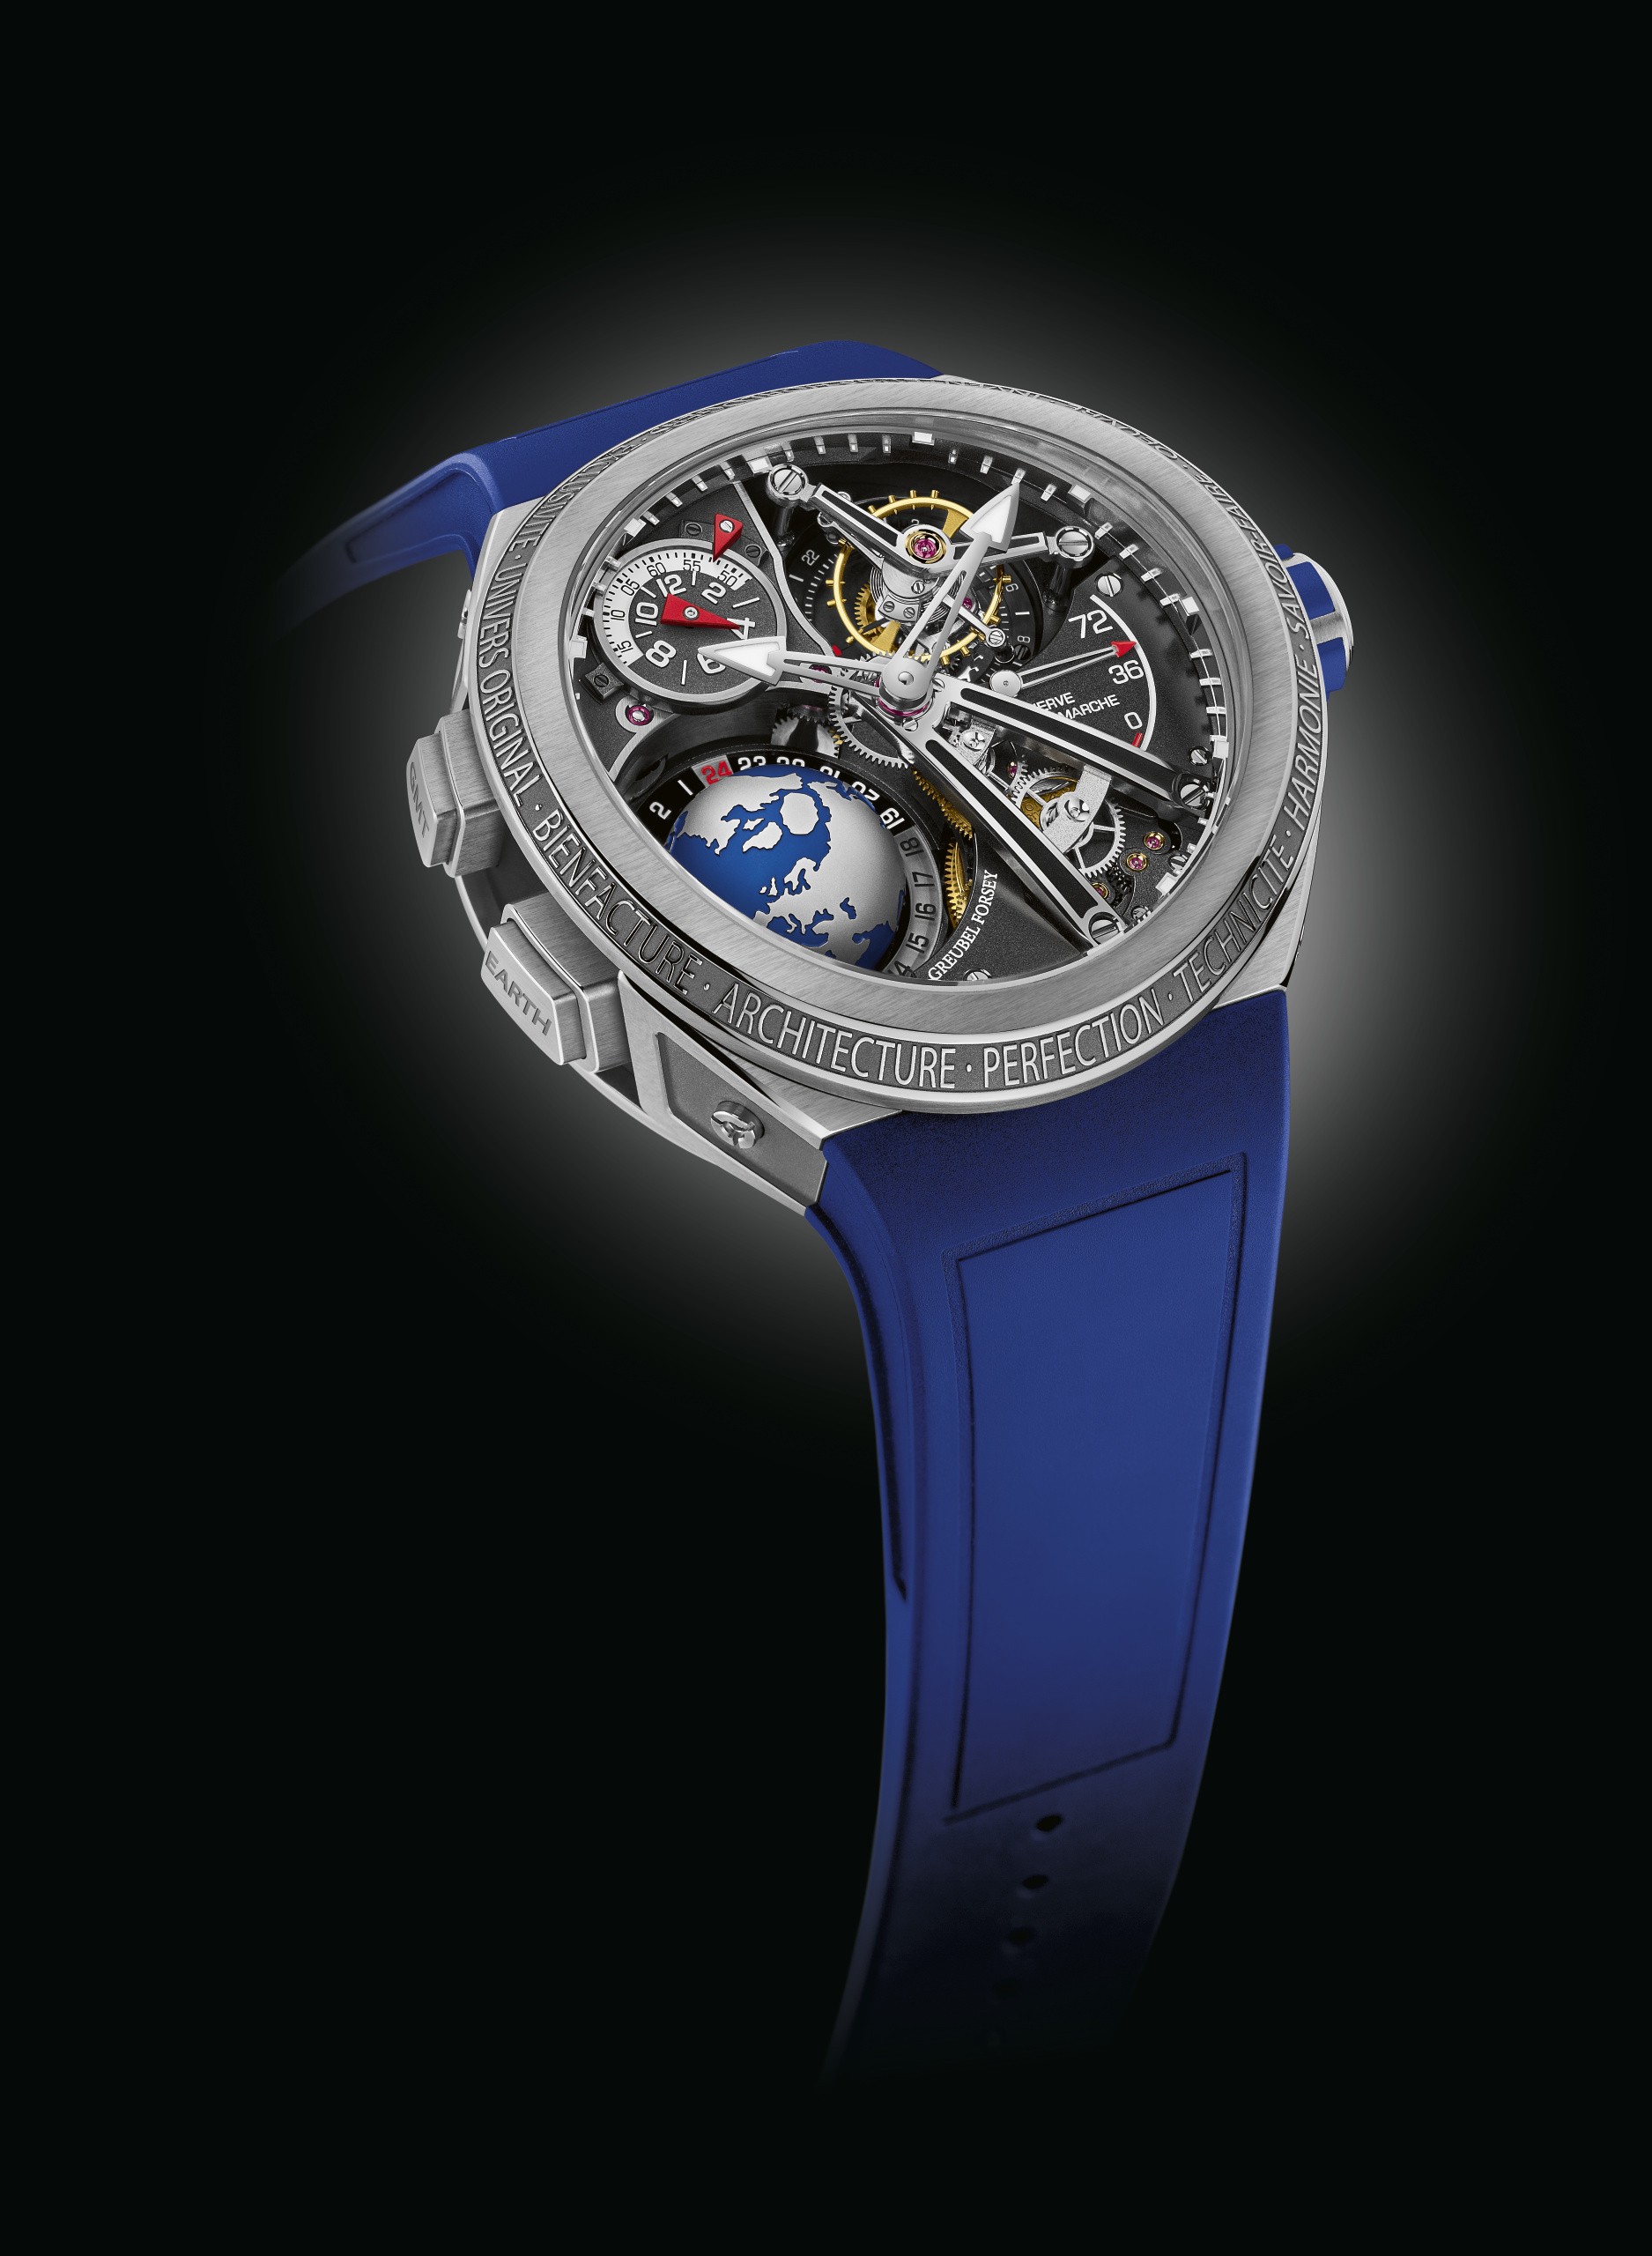 Greubel Forsey launched the GMT Sport for 2020, which is water-resistant to 100 metres, boasts an ergonomical arch and tells the time across cities in the world’s 24 major time zones. Photos: Greubel Forsey